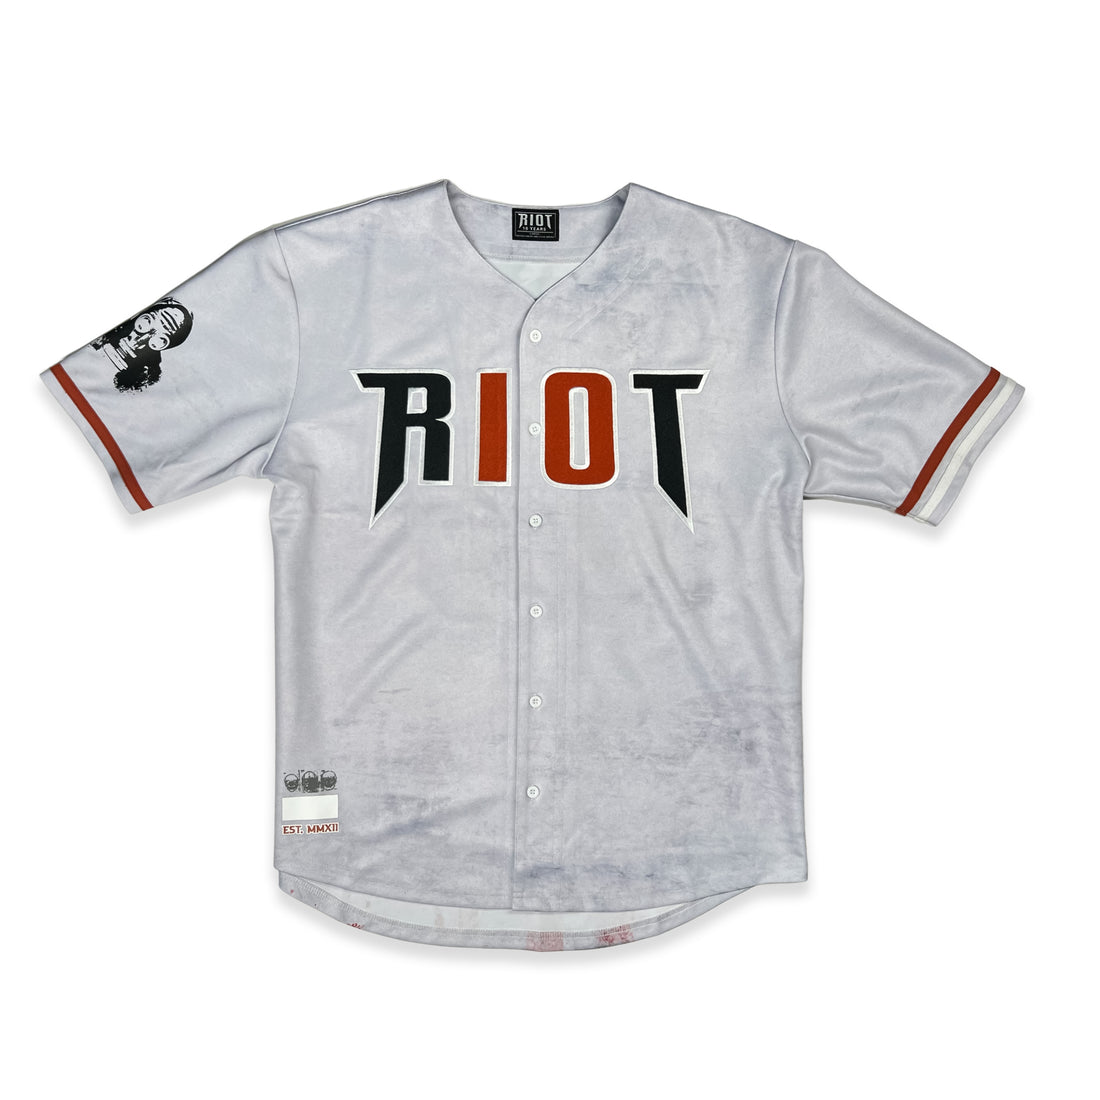 RIOT - 10 Years Jersey - Limited Edition